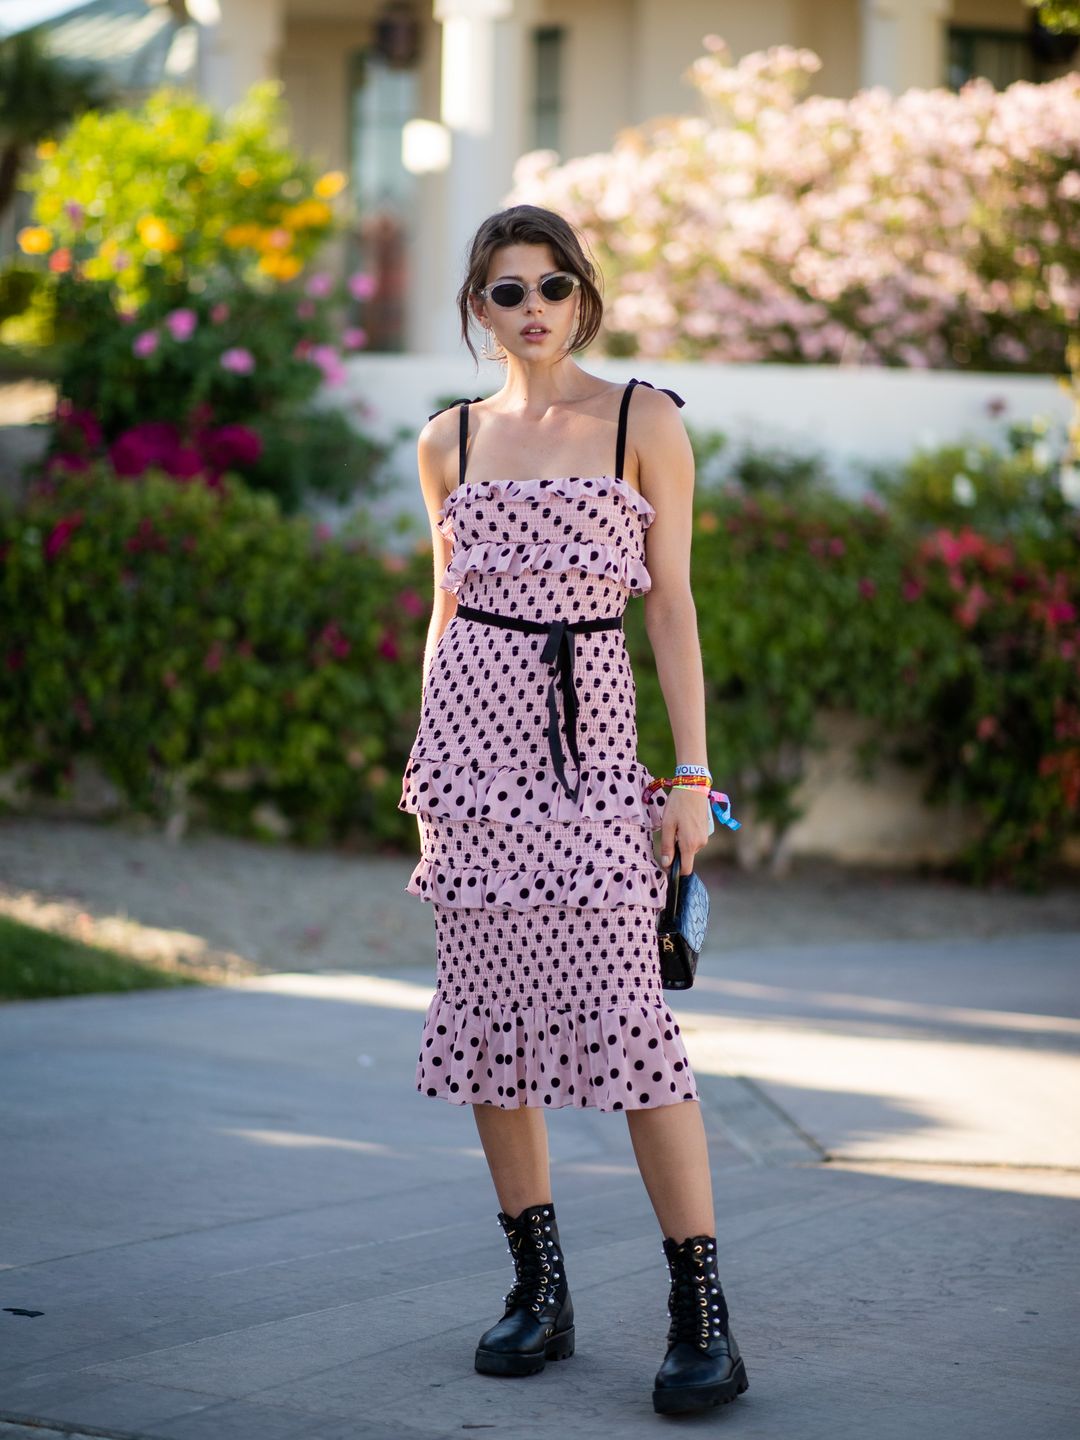 Georgia Fowler is seen wearing pink dress with black dots print, bag, boots at the Revolve Festival during Coachella Festival on April 13, 2019 